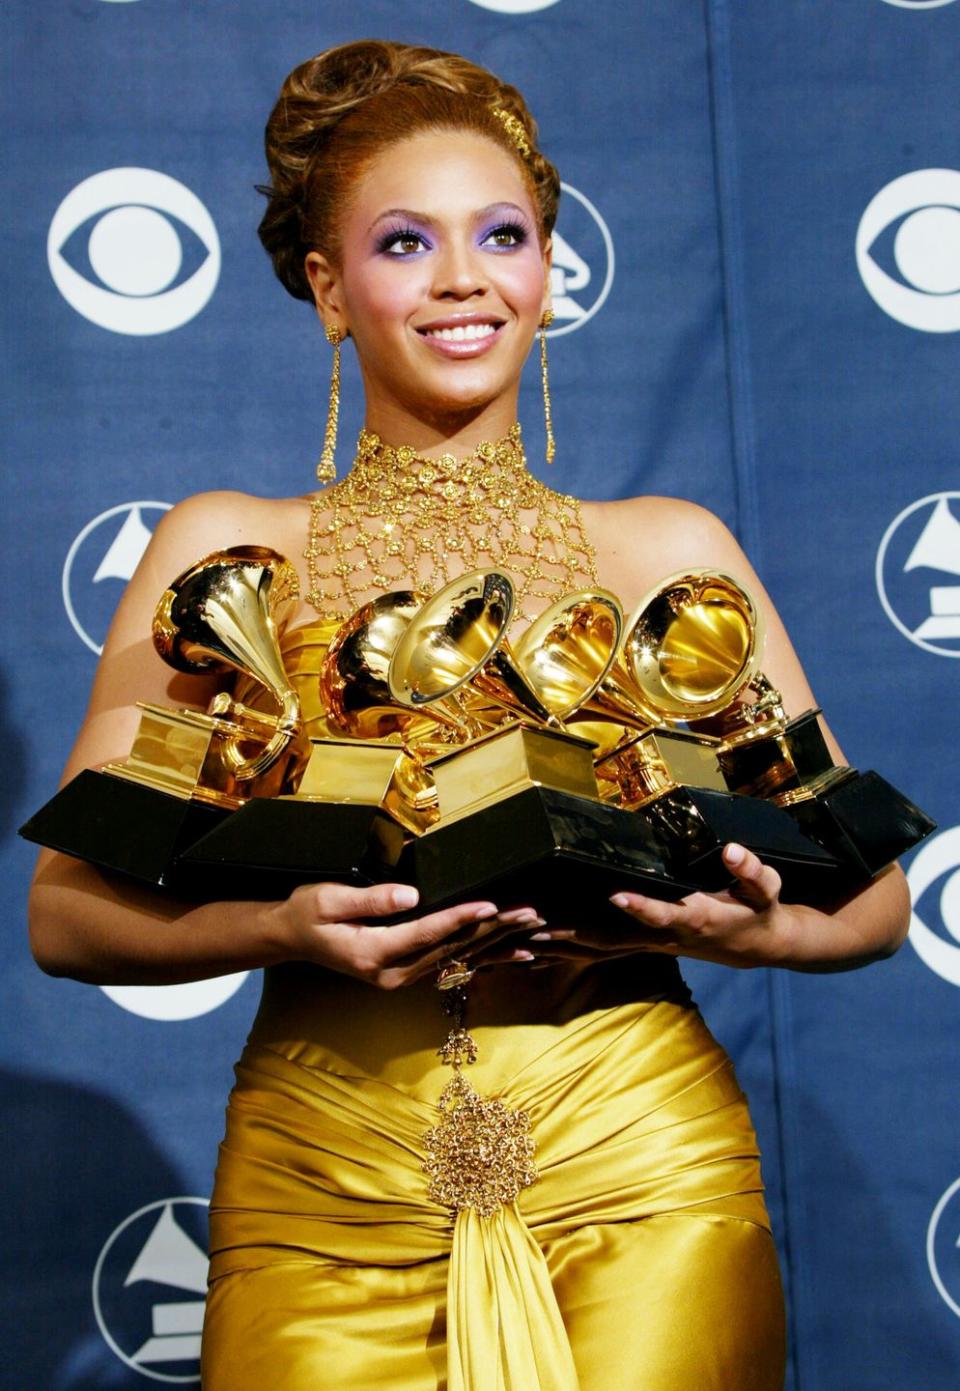 <p>There was no doubt of Beyoncé's star power after the Grammys following her solo debut. The singer took home a total of five awards for her album <em>Dangerously in Love</em>. </p>